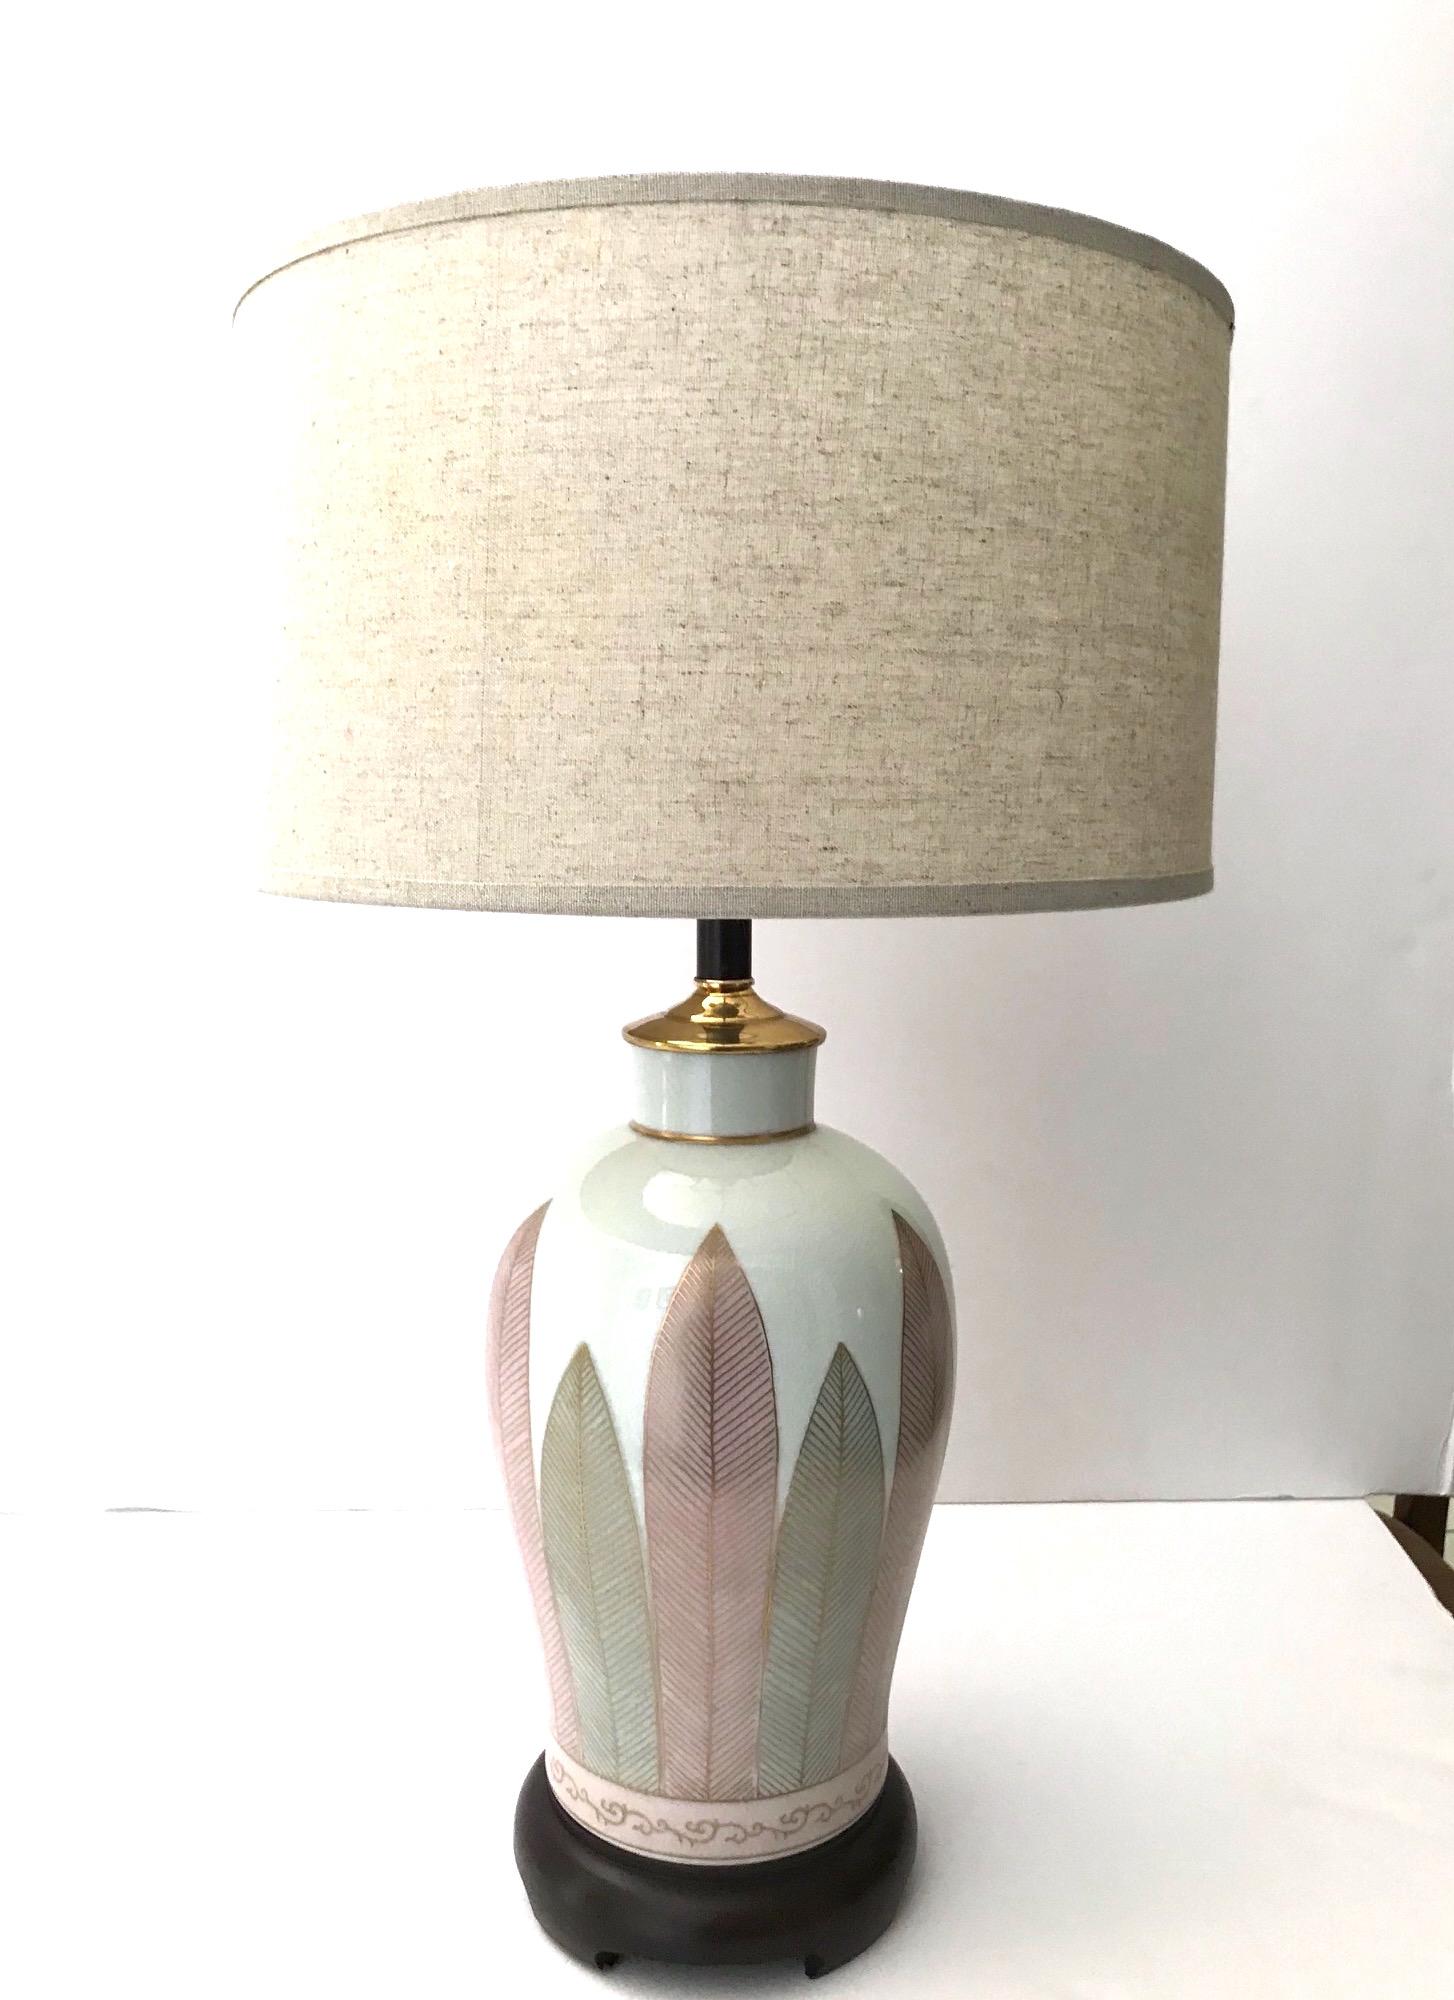 Pair of Japanese Hand Painted Porcelain Lamps in White, Grey, and Pink, C. 1970s For Sale 3